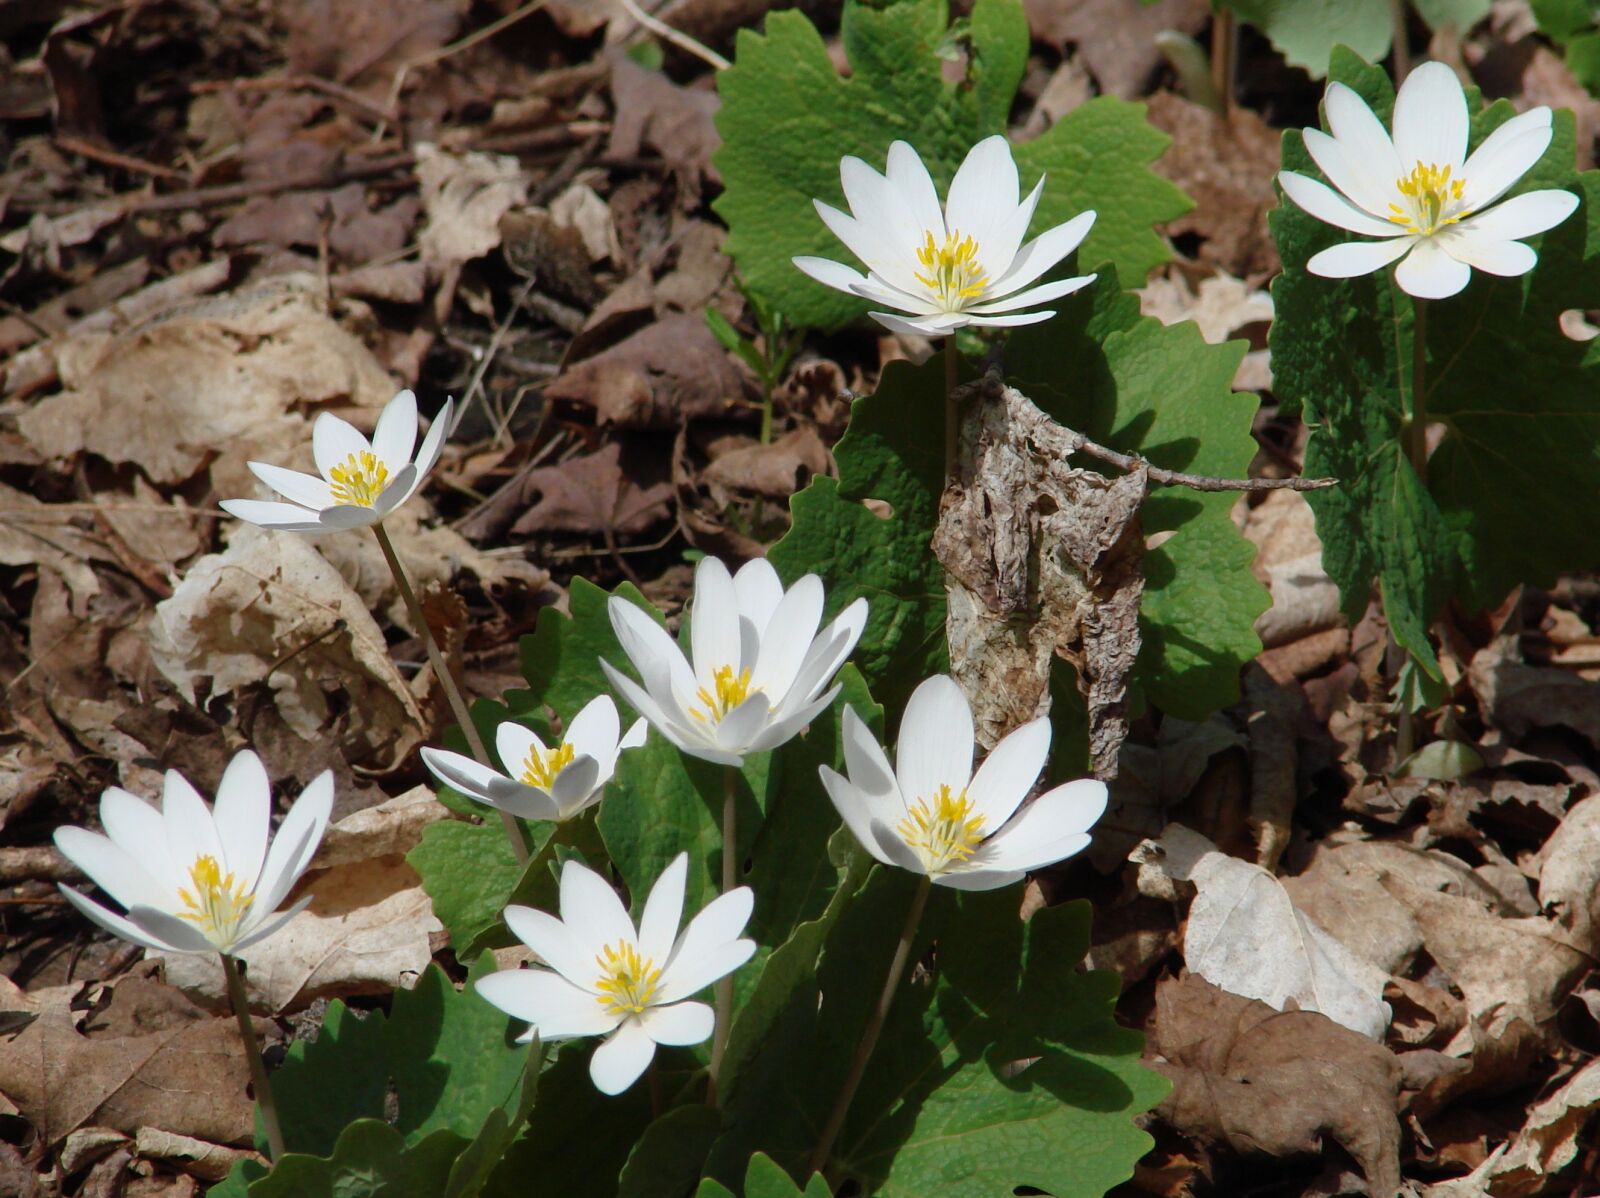 Sony DSC-H5 sample photo. Sanguinarea canadensis, bloodroot, wildflowers photography